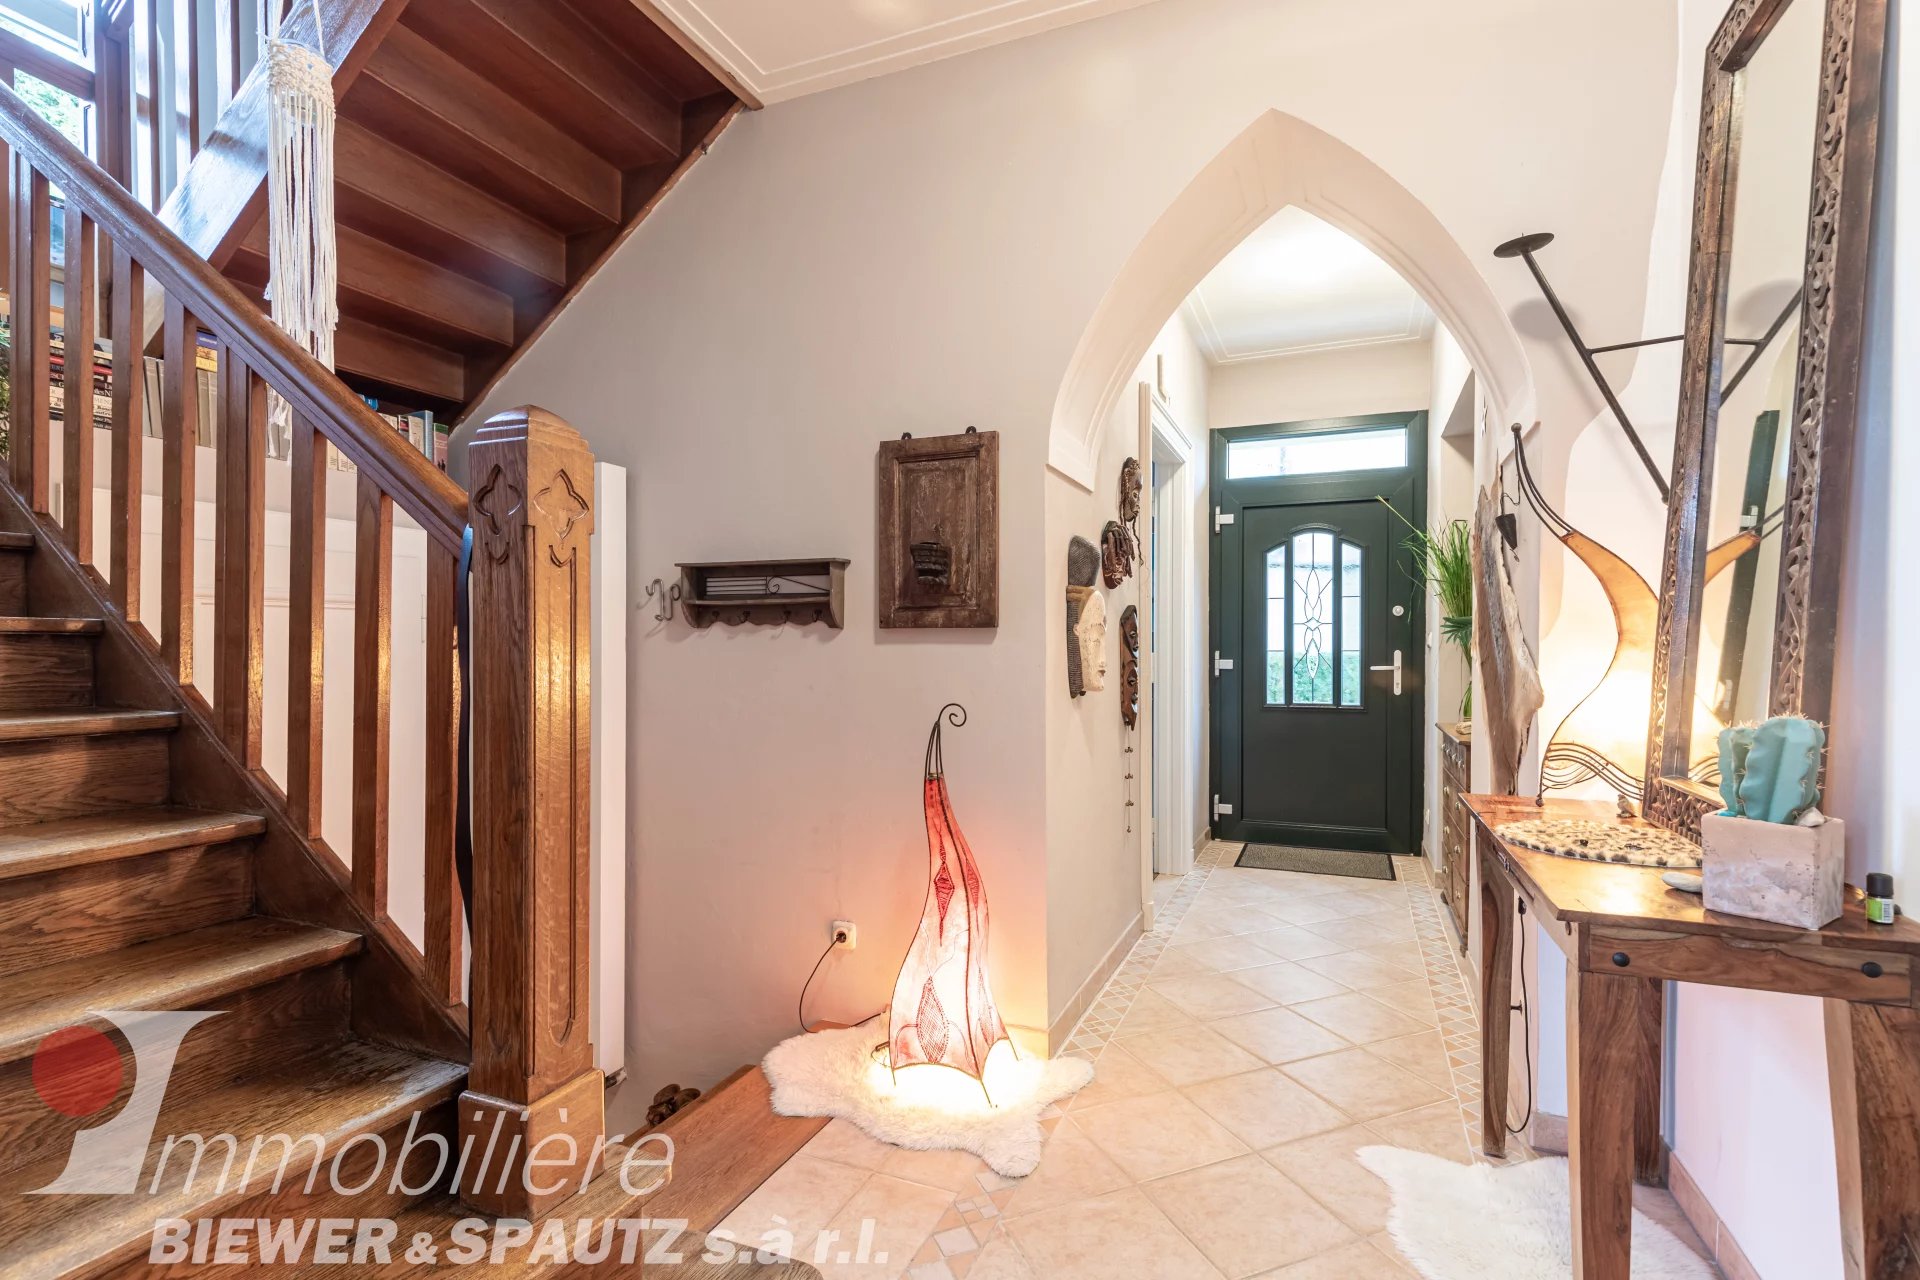 FOR SALE - House (former presbytery) with 3 bedrooms in Berbourg